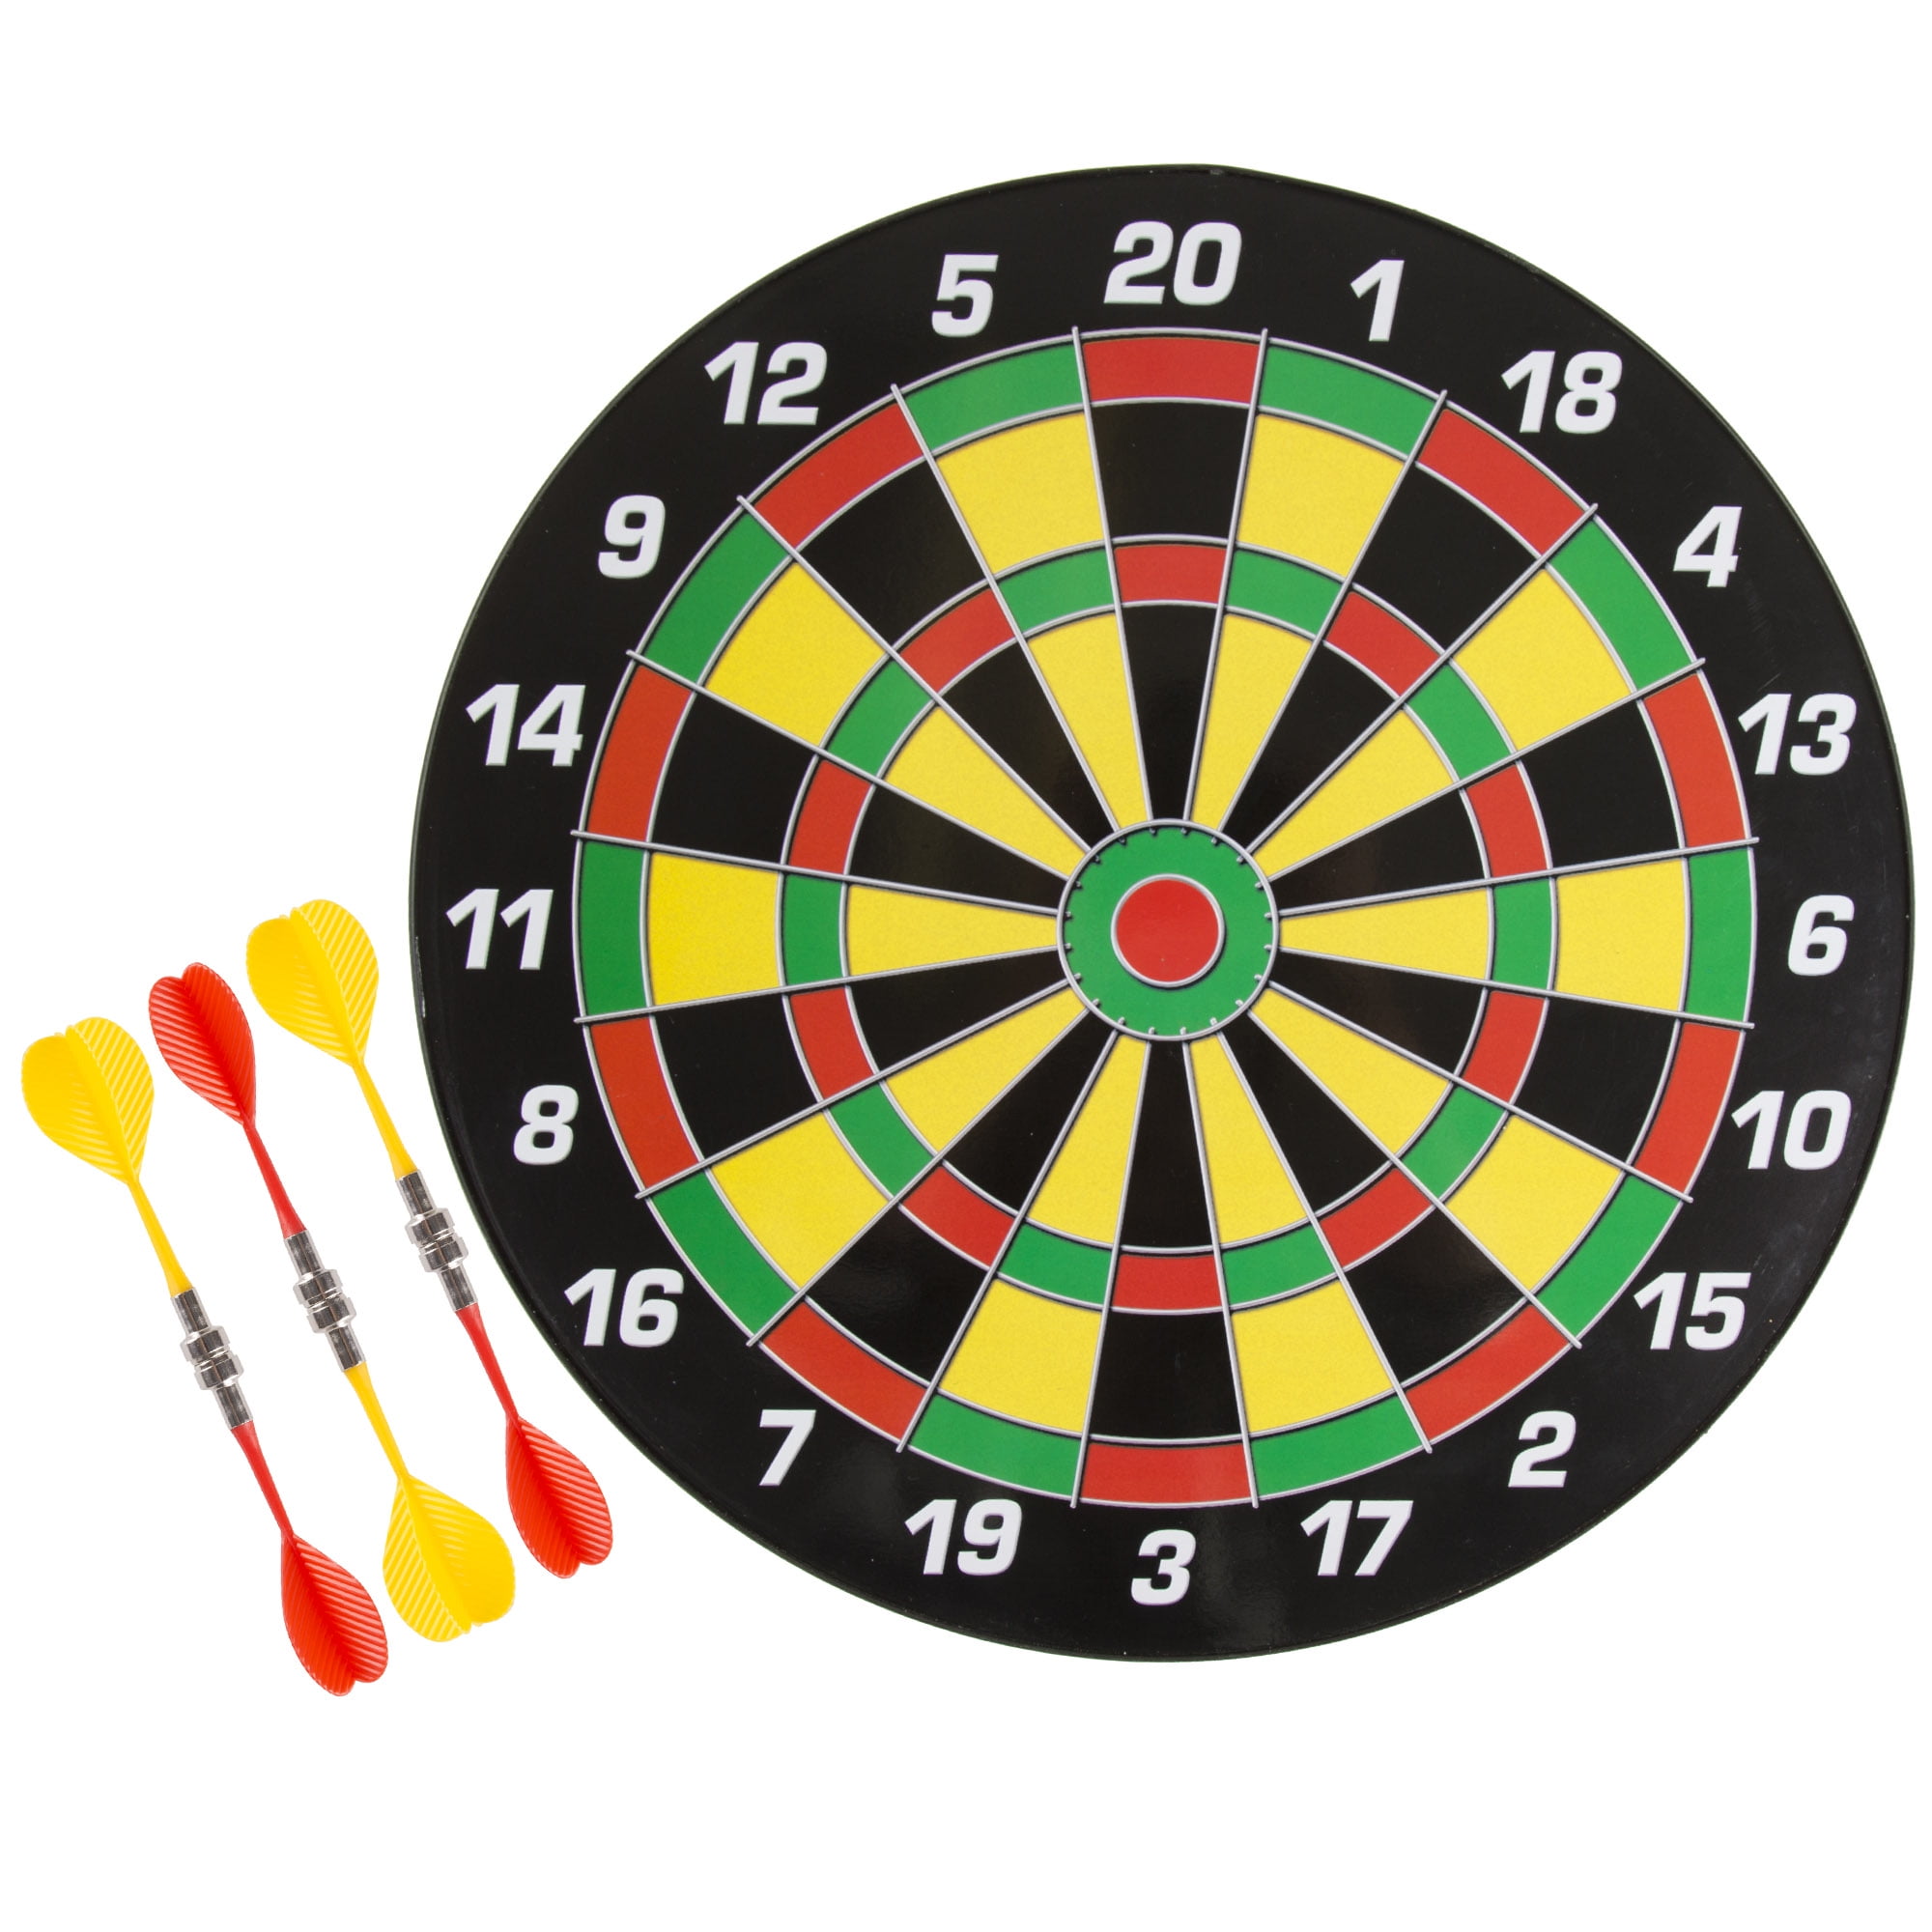 16 Official Size Magnetic Dartboard with 6 Darts included c2ab71 